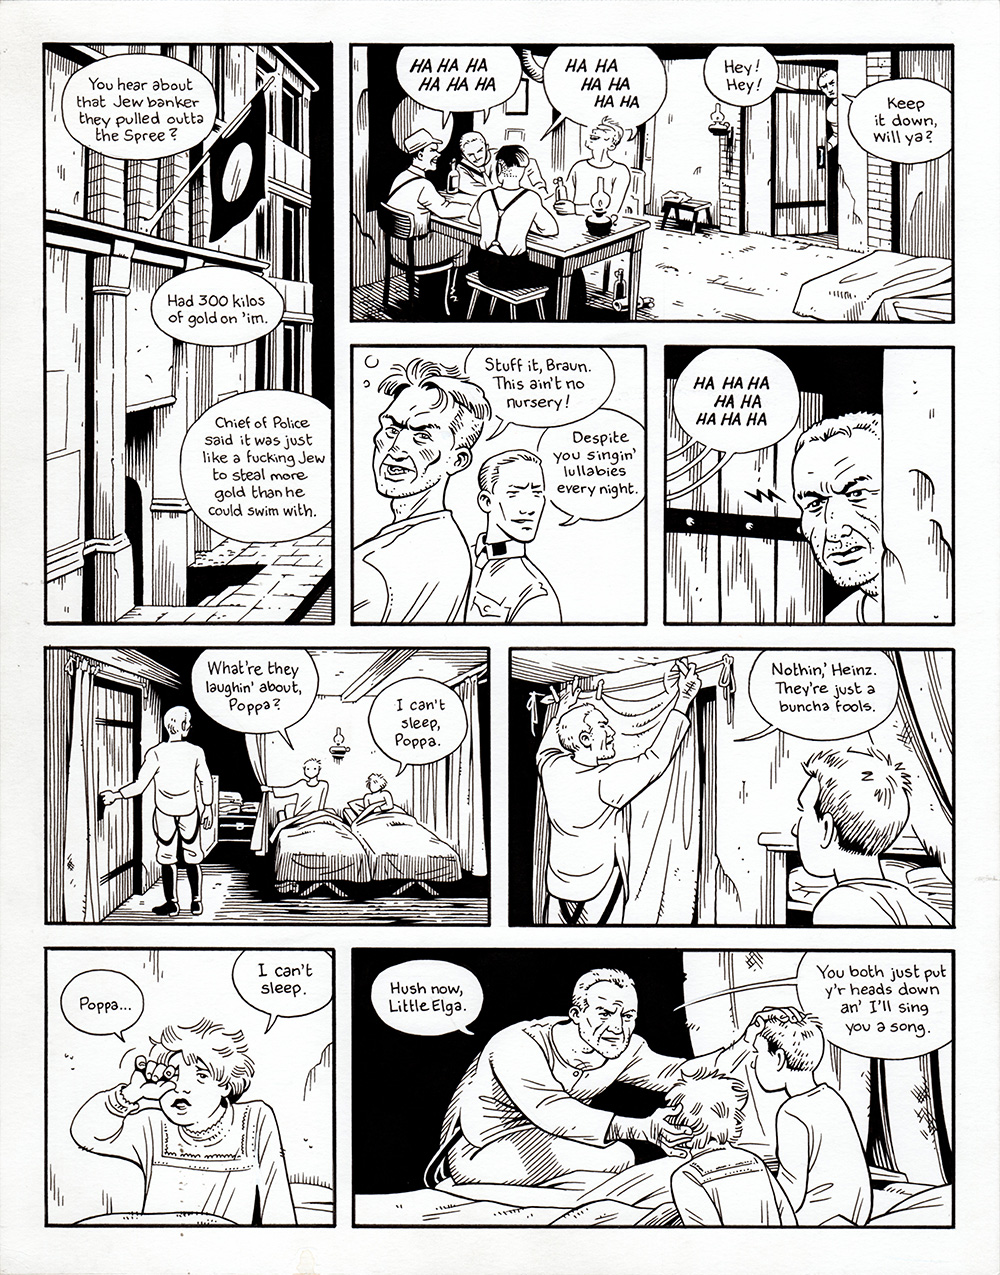 Berlin - page 436 Book Three: City of Light - page 034